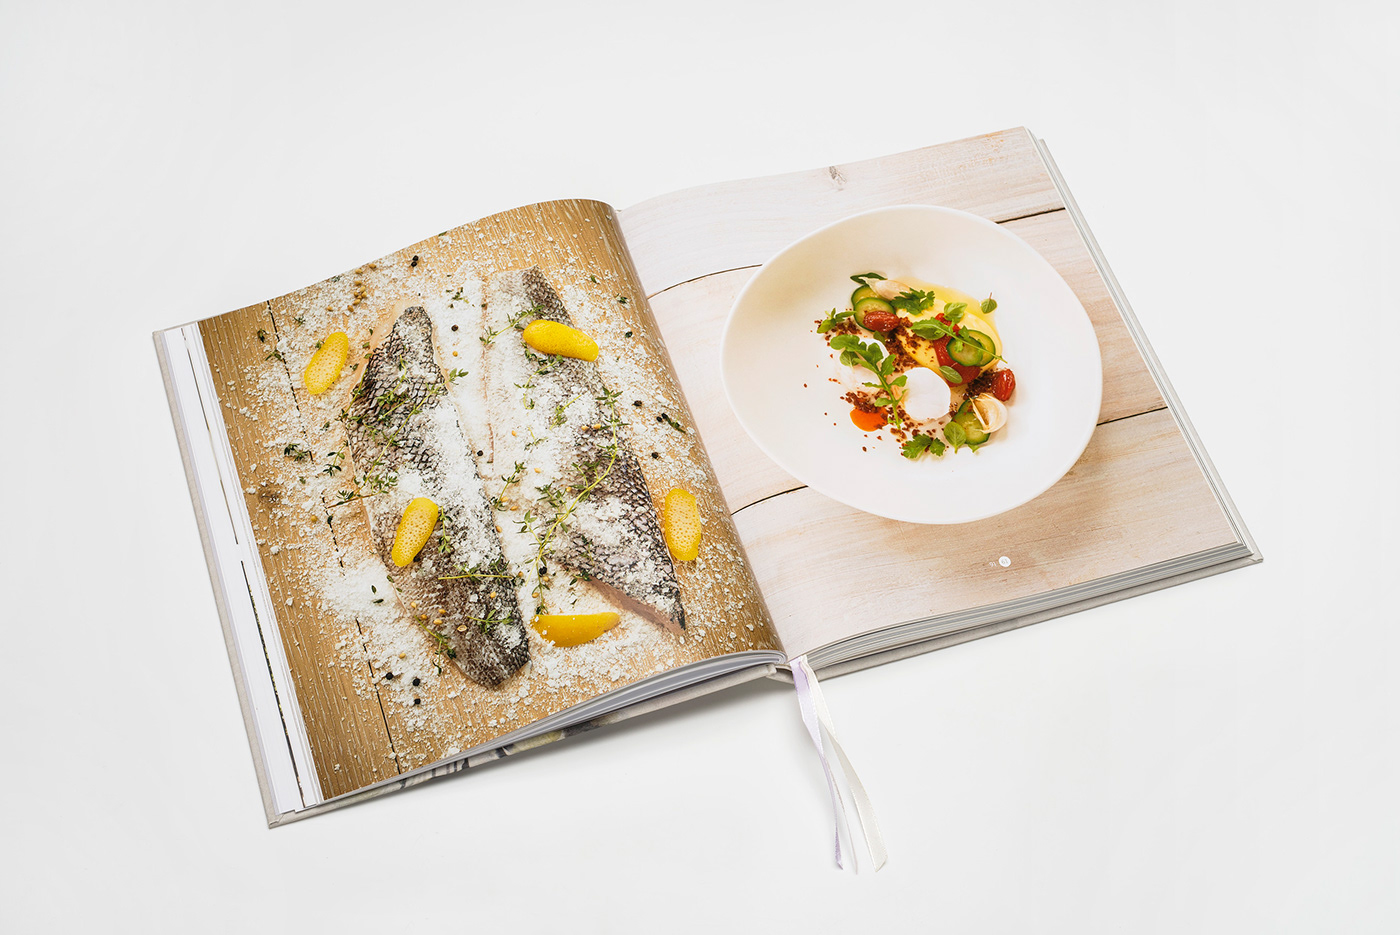 saison The french cafe cookbook